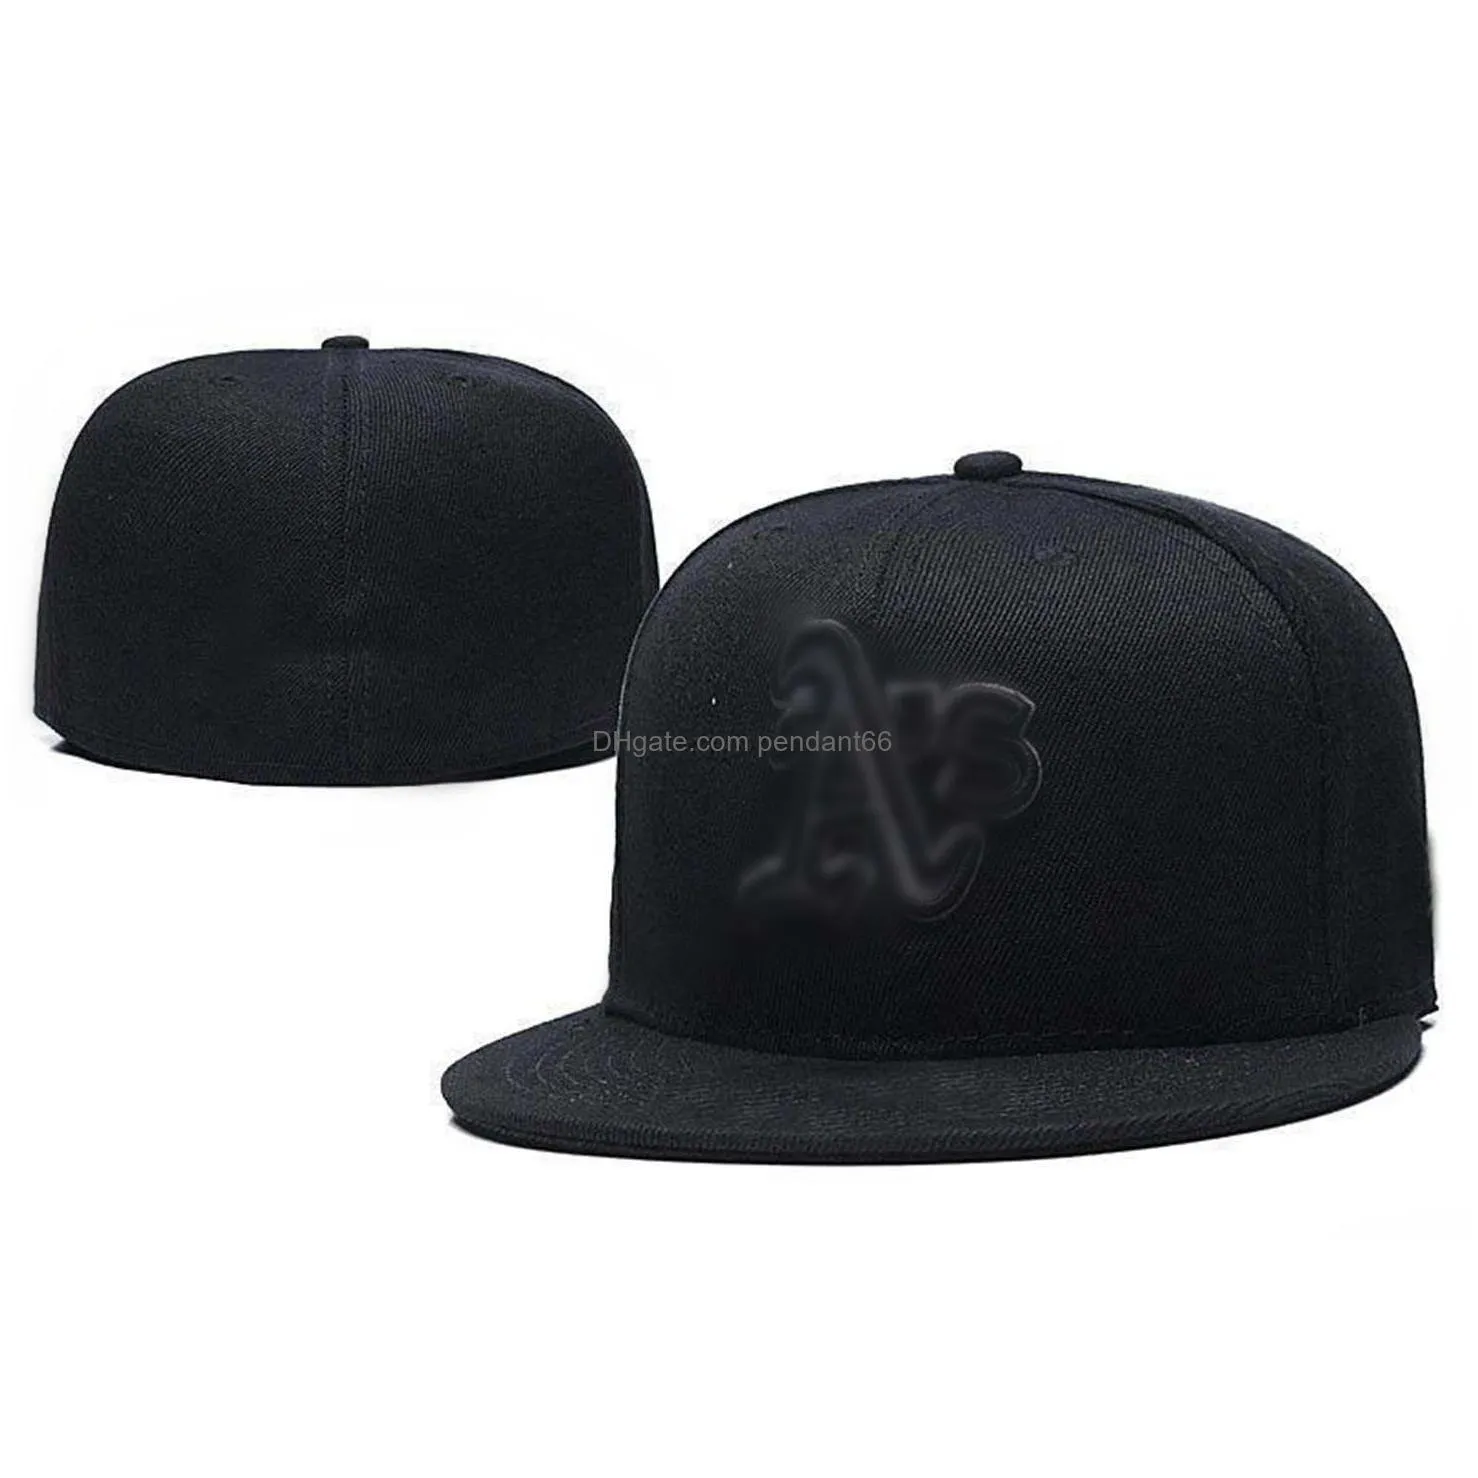 good quality athletics as letter baseball caps casual outdoor sports casquette for men women wholesale fitted hats h6-7.14